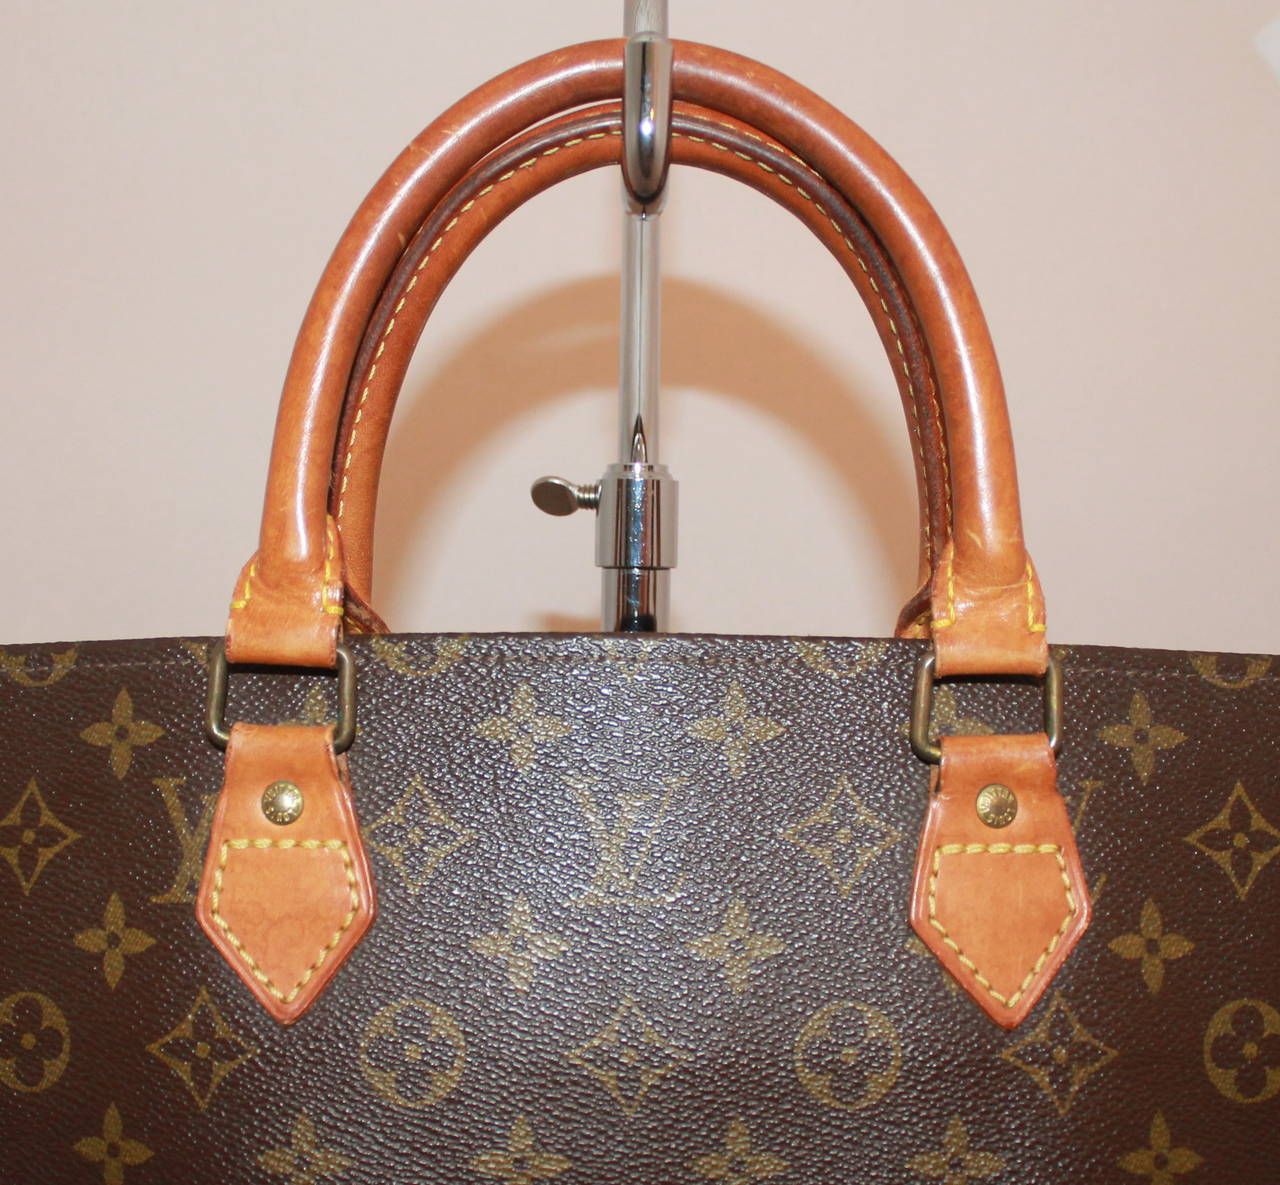 Louis Vuitton Vintage Brown Monogram Tote. This long tote is in excellent vintage condition. 

Measurements:
Length- 15.5